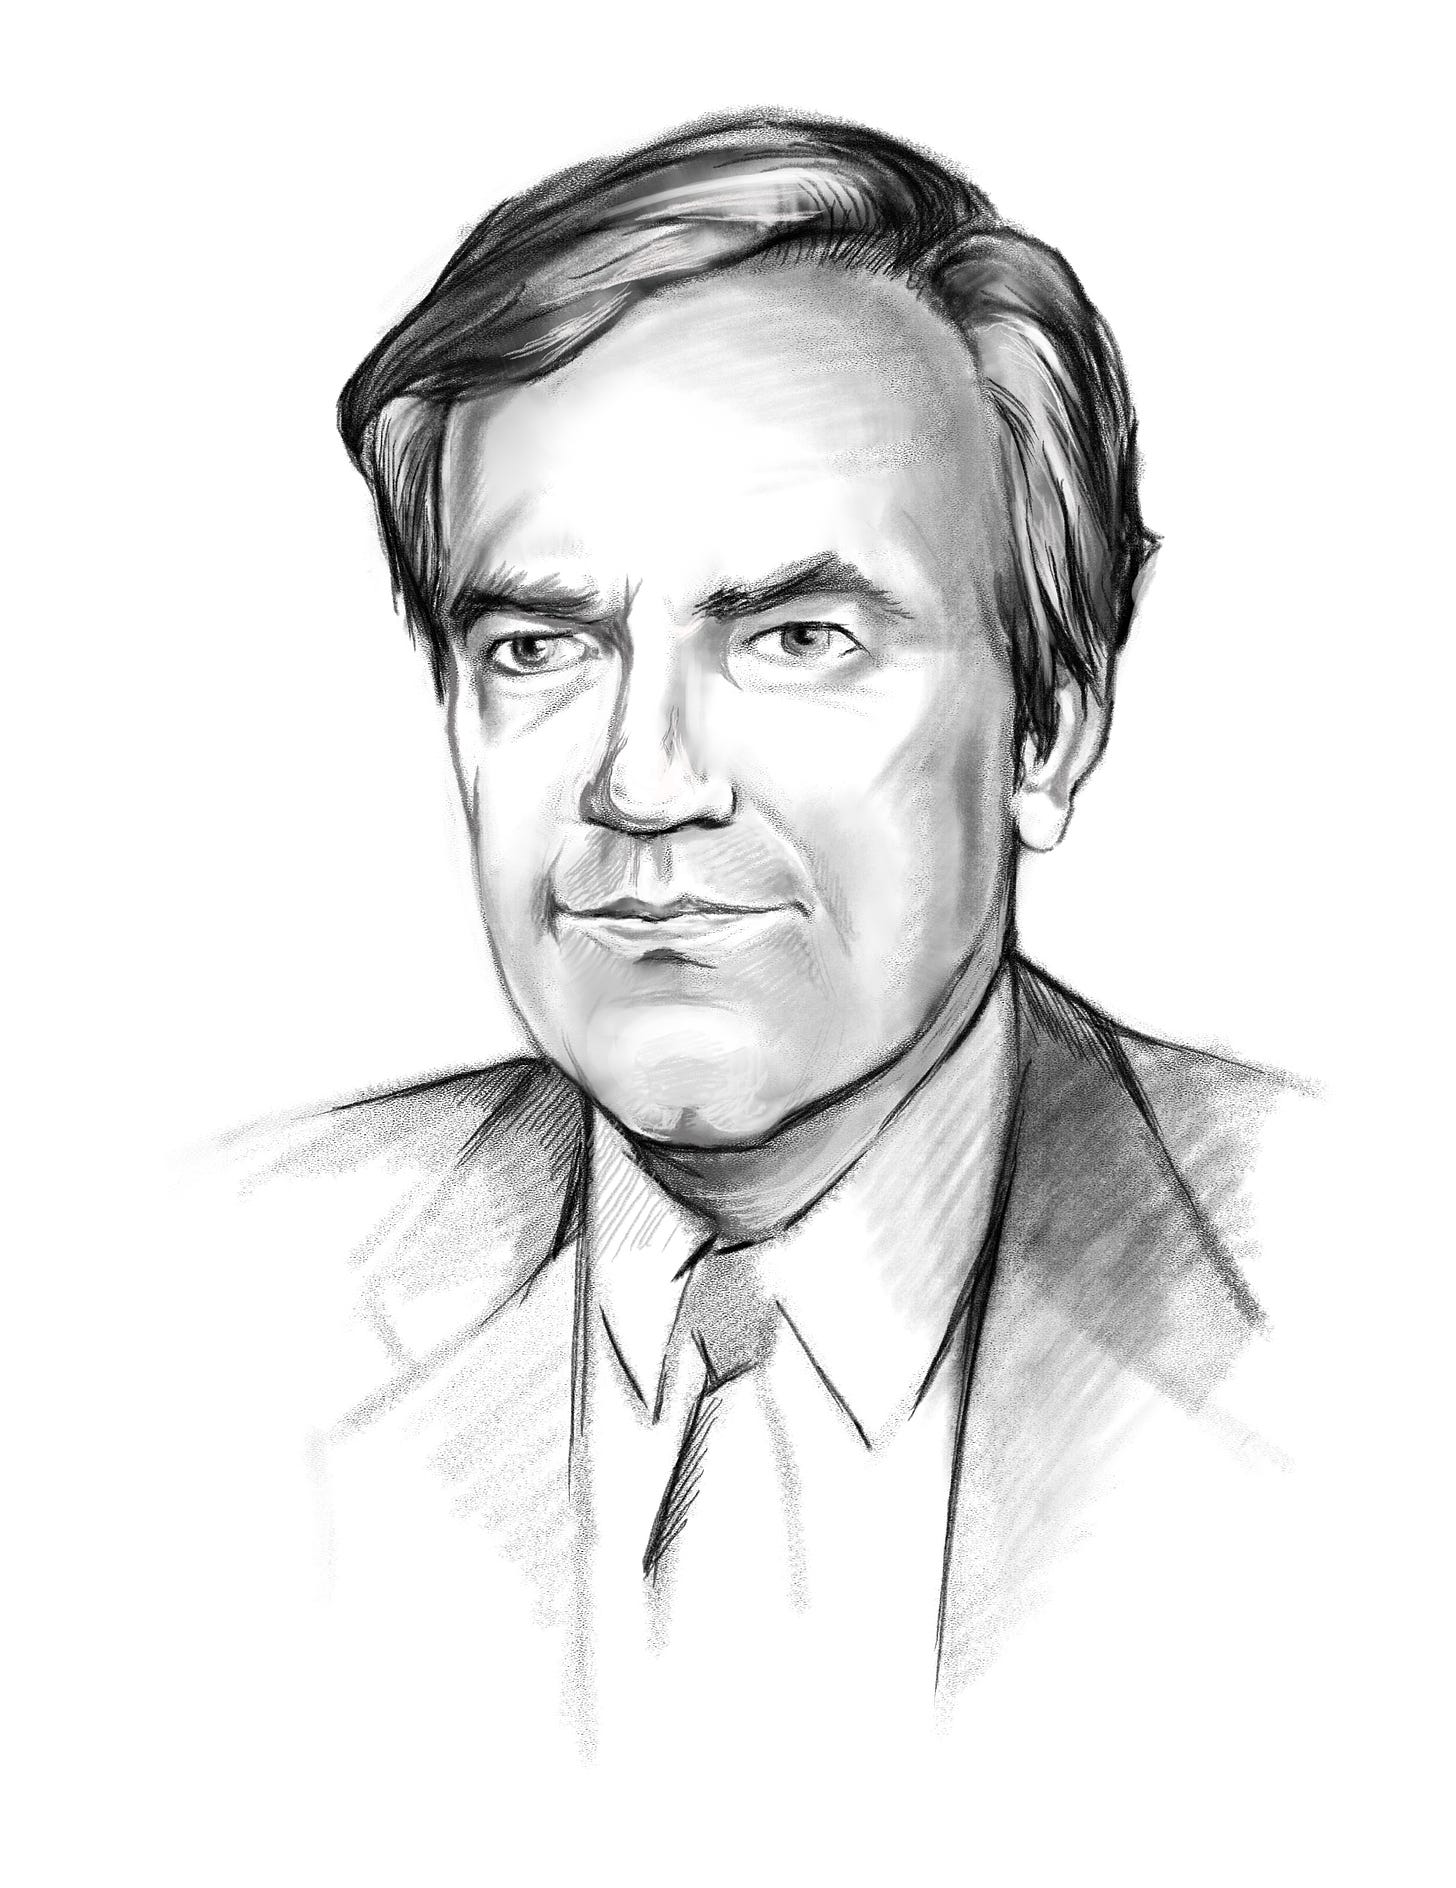 A black-and-white sketch of a man in a shirt and tie with a blazer, facing the viewer